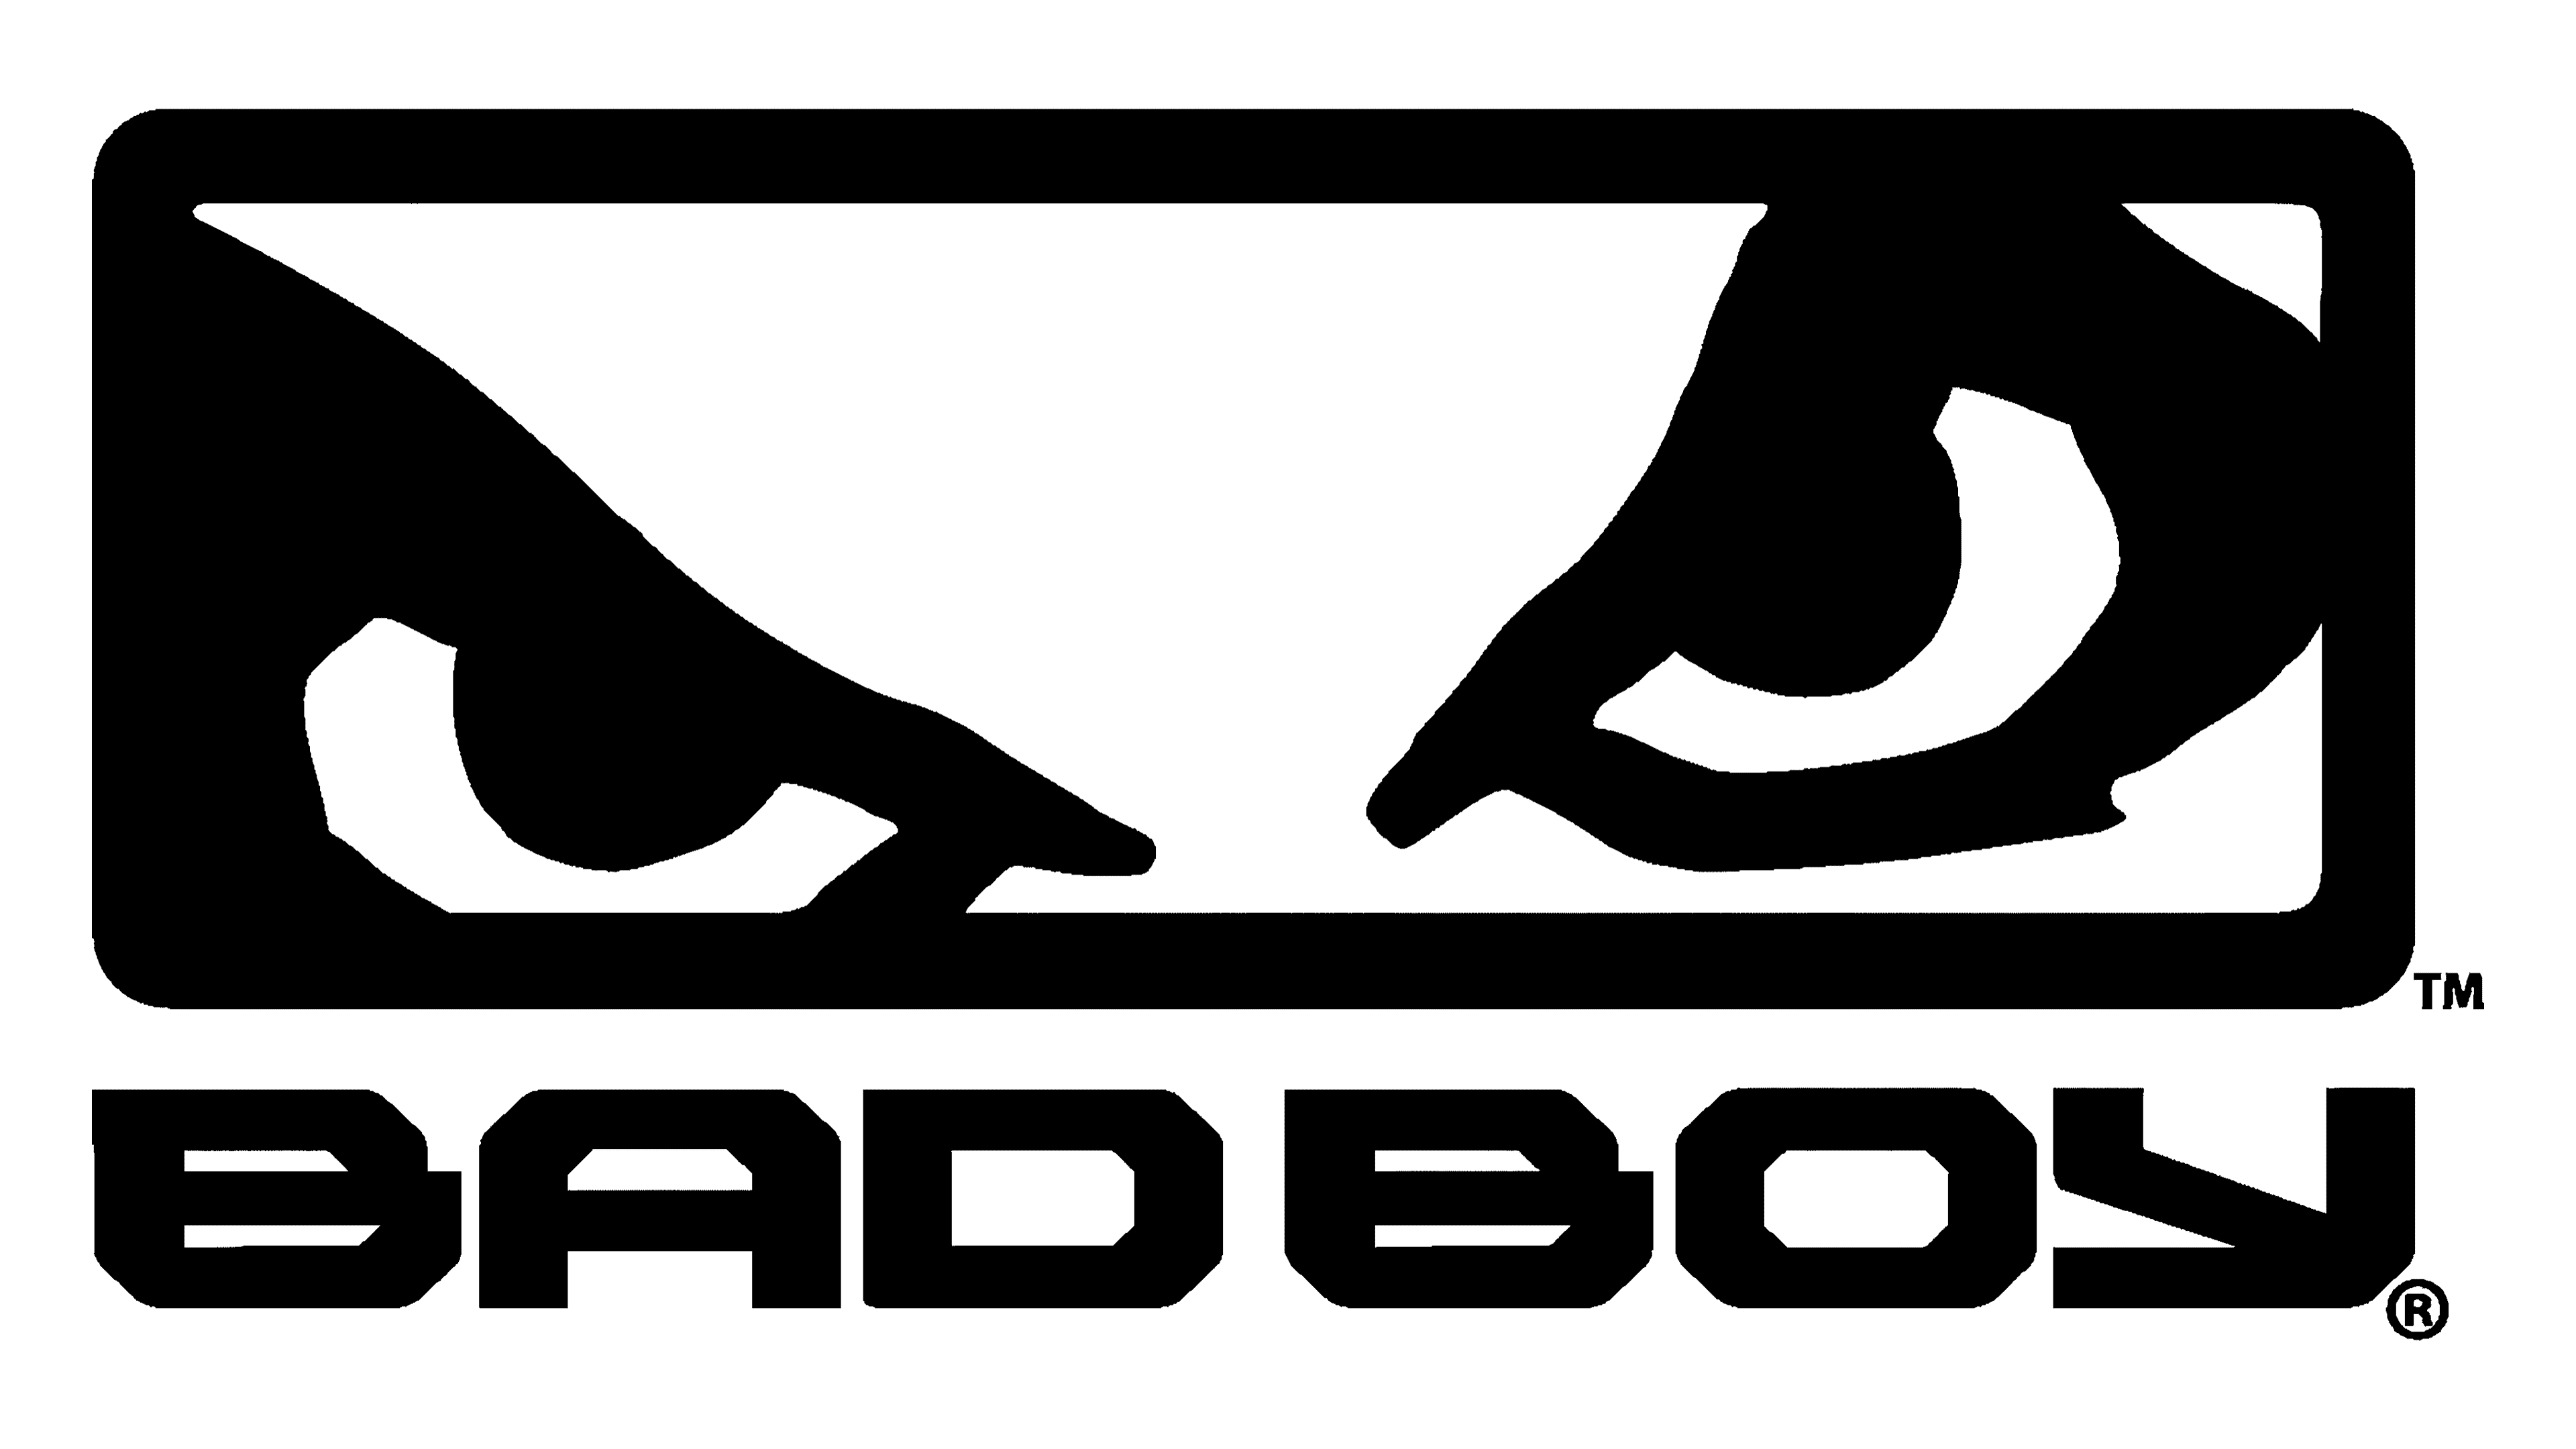 Bad Boy Logo Vector Art, Icons, and Graphics for Free Download